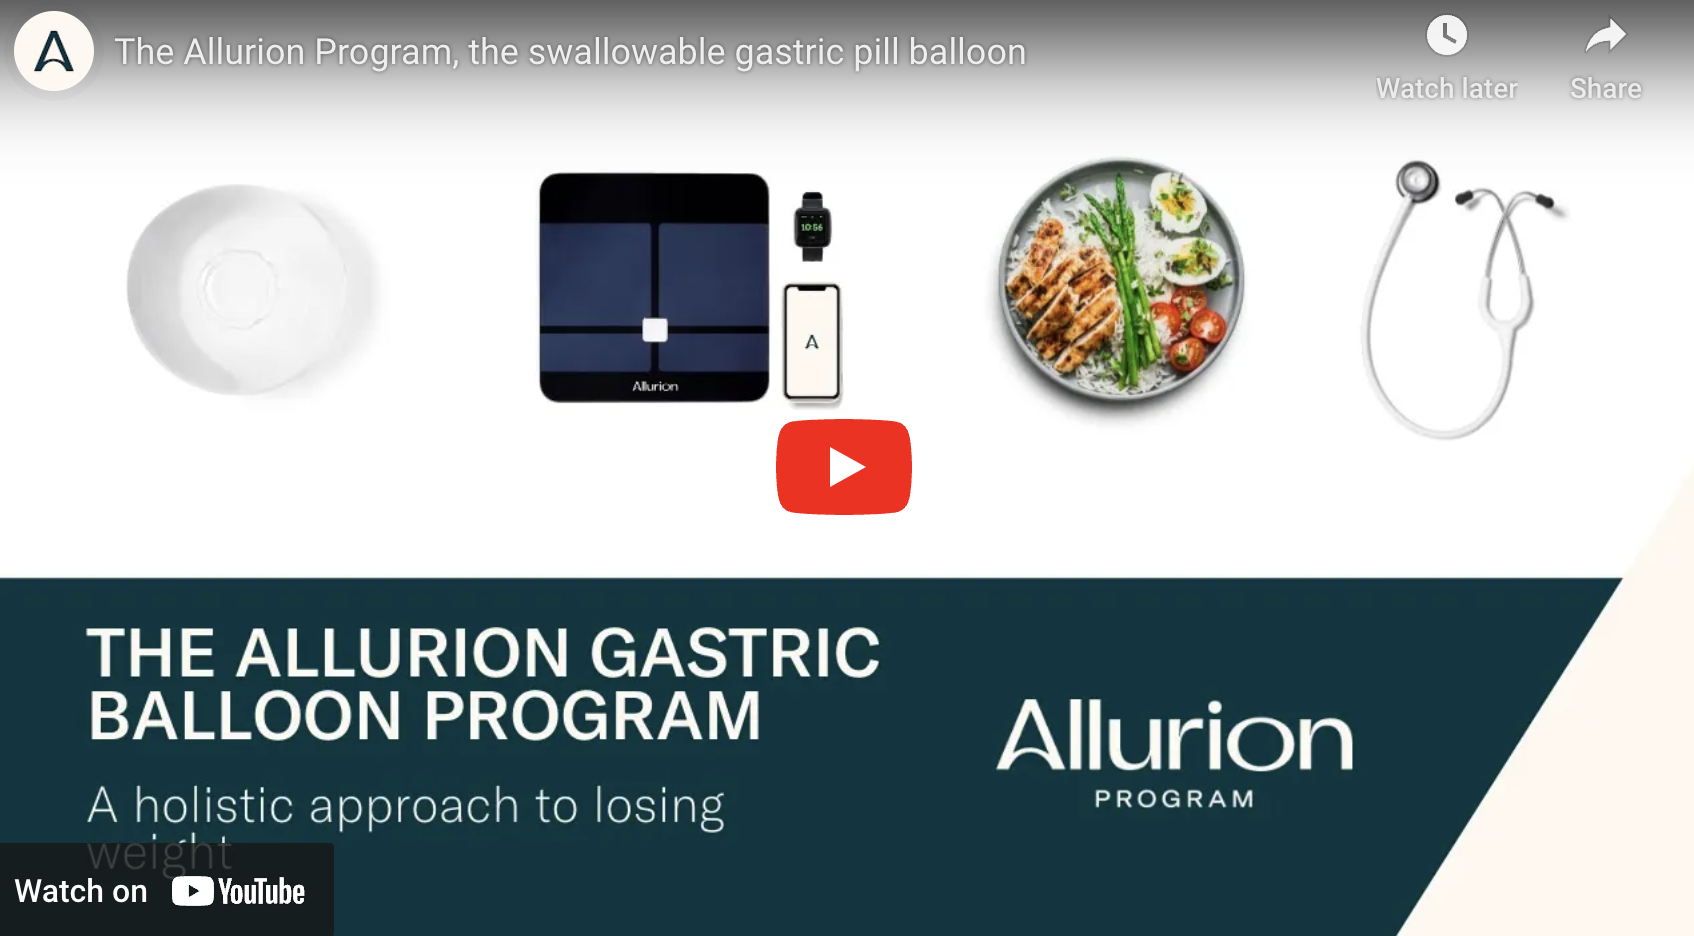 Video of the Allurion Programme